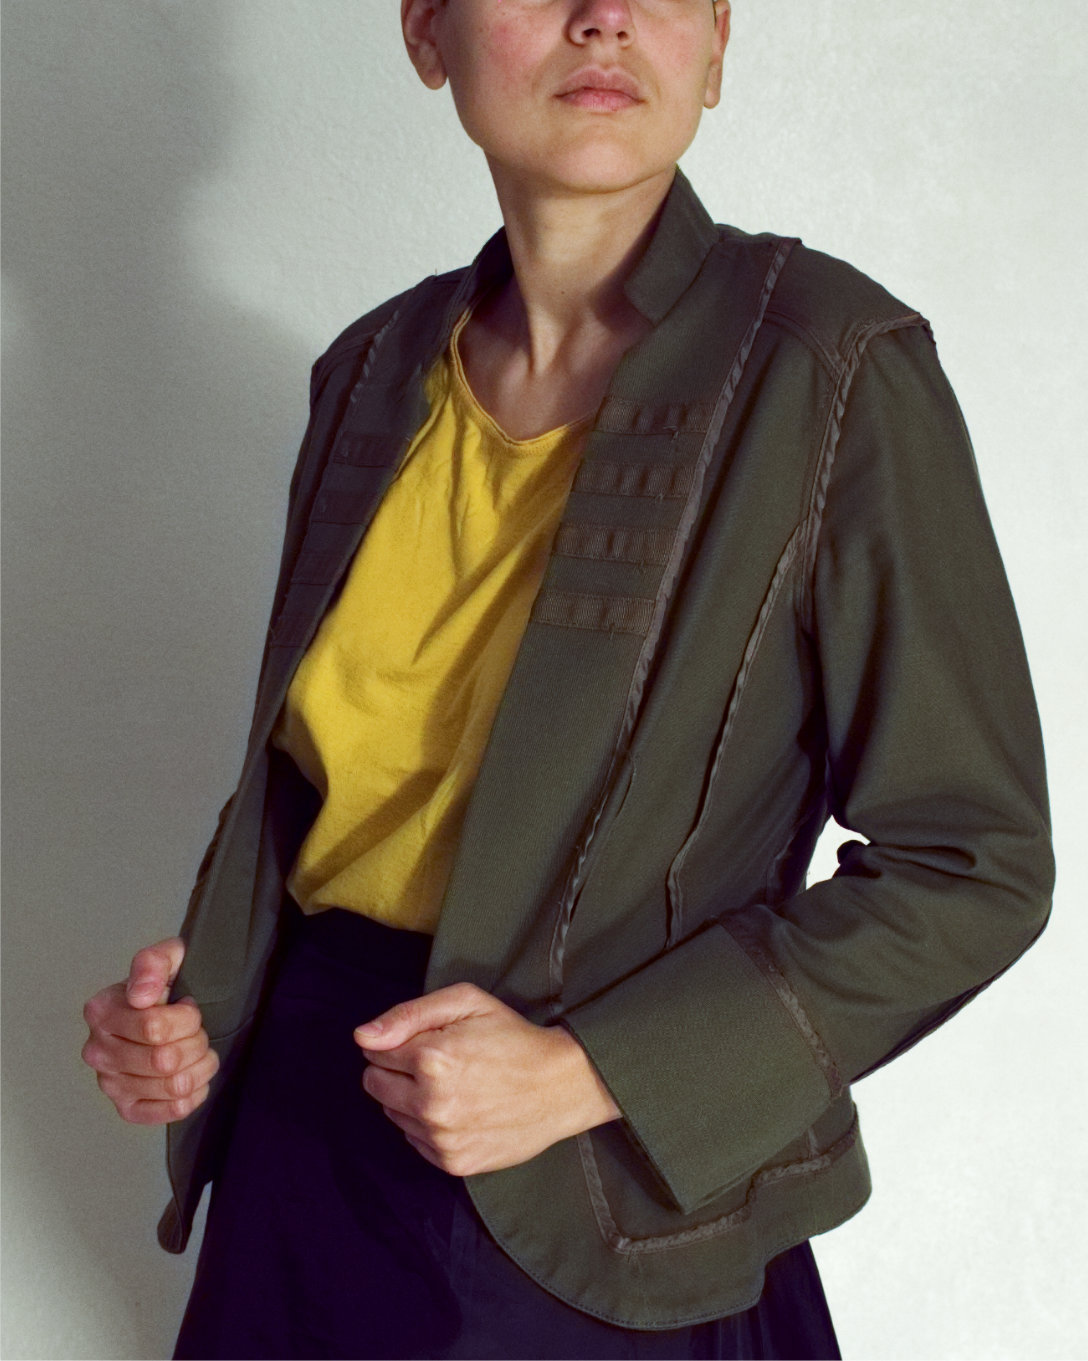 Model wears a olive green jacket and a yellow shirt, their eyes are outside the frame hidden